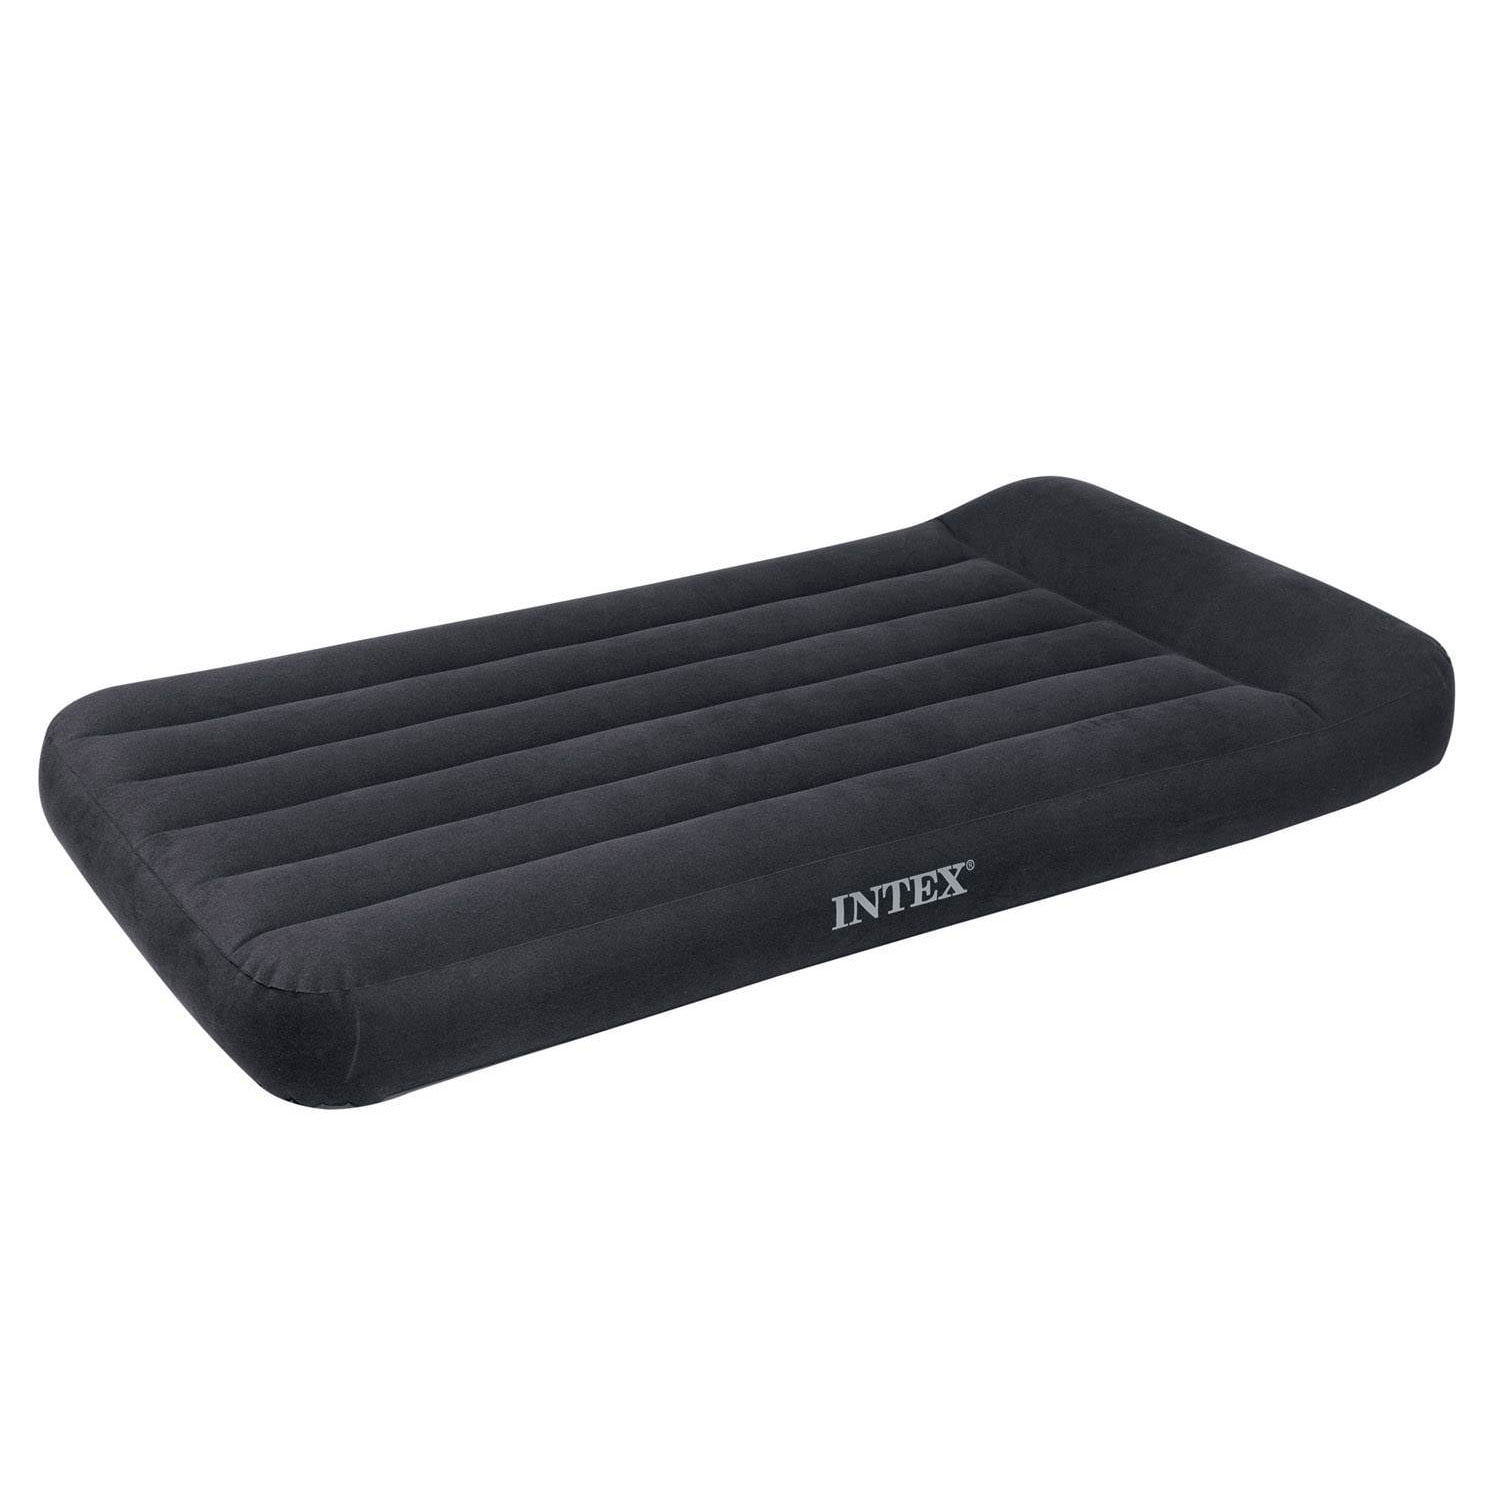 Intex Dura-Beam Series Pillow Rest Classic Airbed with Internal Pump Twin